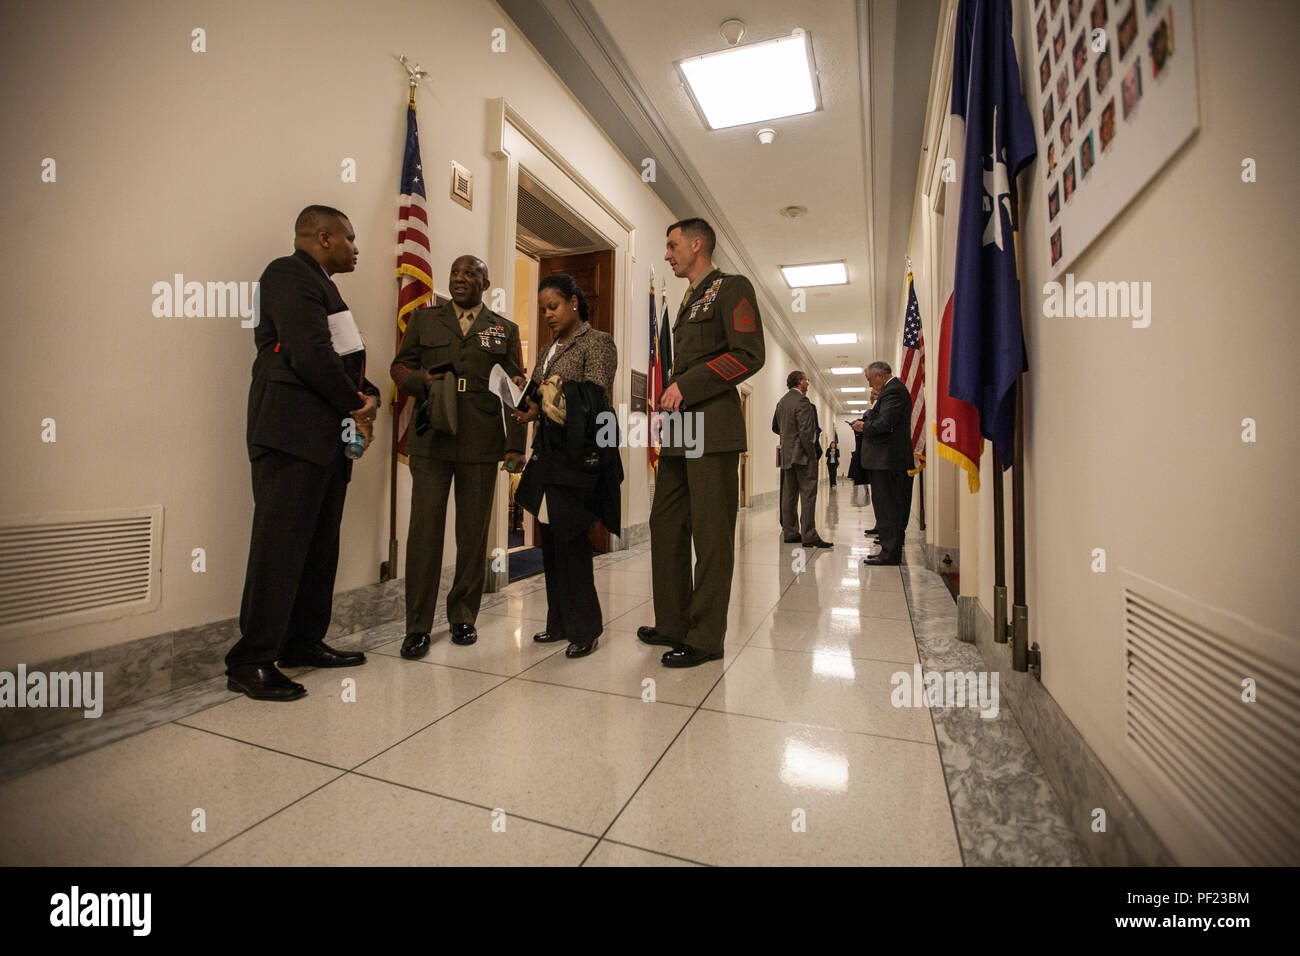 The 18th Sergeant Major of the Marine Corps, Ronald L. Green, speaks with members of the Committee on Appropriations, Military Construction, U.S. House of Representatives, at Capitol Hill, Washington D.C., Feb. 23, 2016. Sgt. Maj. Green was making final preparations prior to his testimony on the quality of life within the Marine Corps. (U.S. Marine Corps photo by Sgt. Melissa Marnell, Office of the Sergeant Major of the Marine Corps/Released) Stock Photo